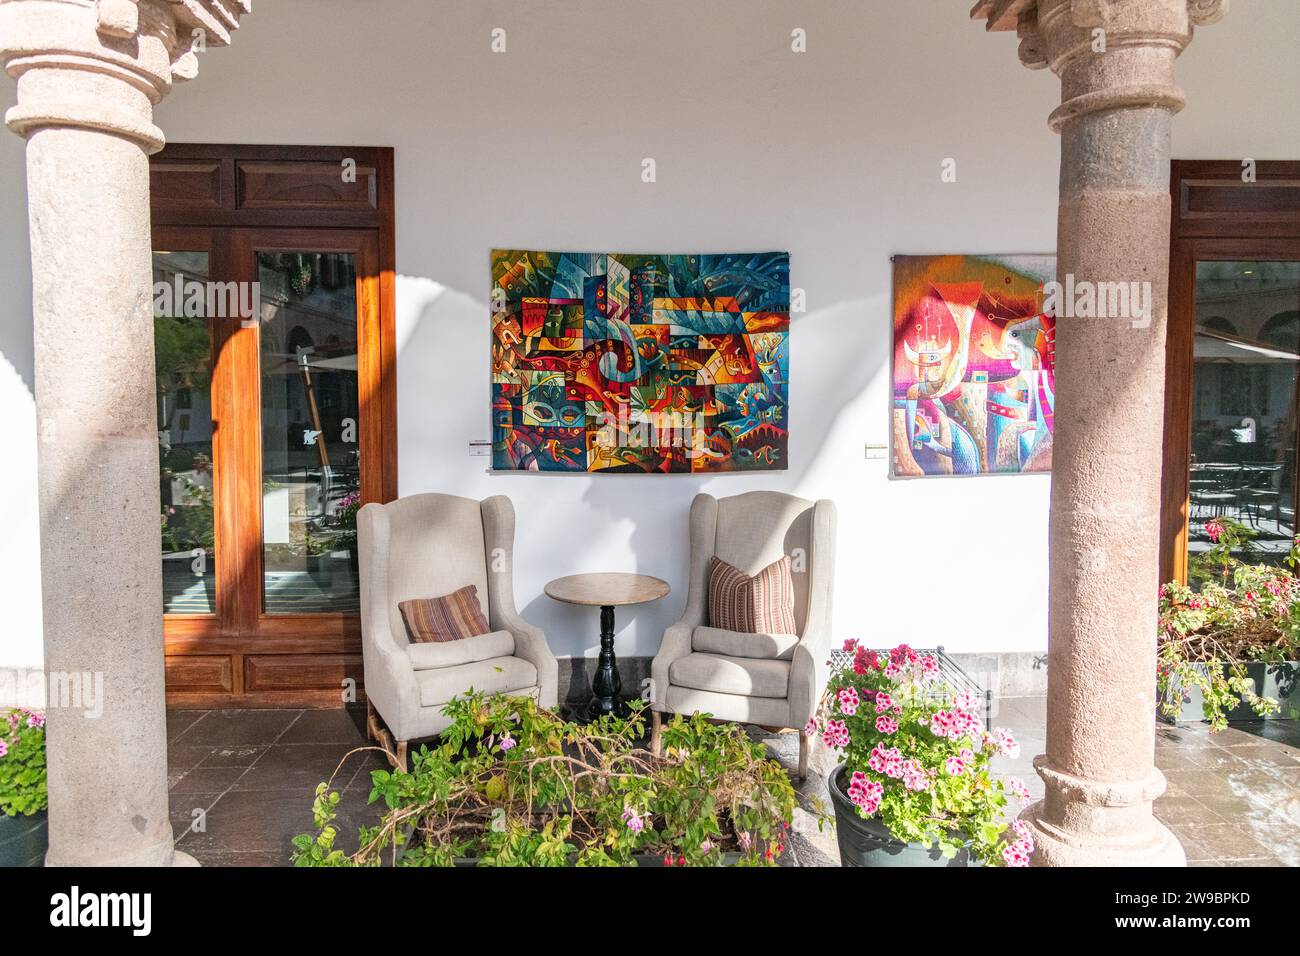 Artwork / Painting hanging on the wall in the courtyard of the Marriott El Convento Hotel in Cusco, Peru Stock Photo